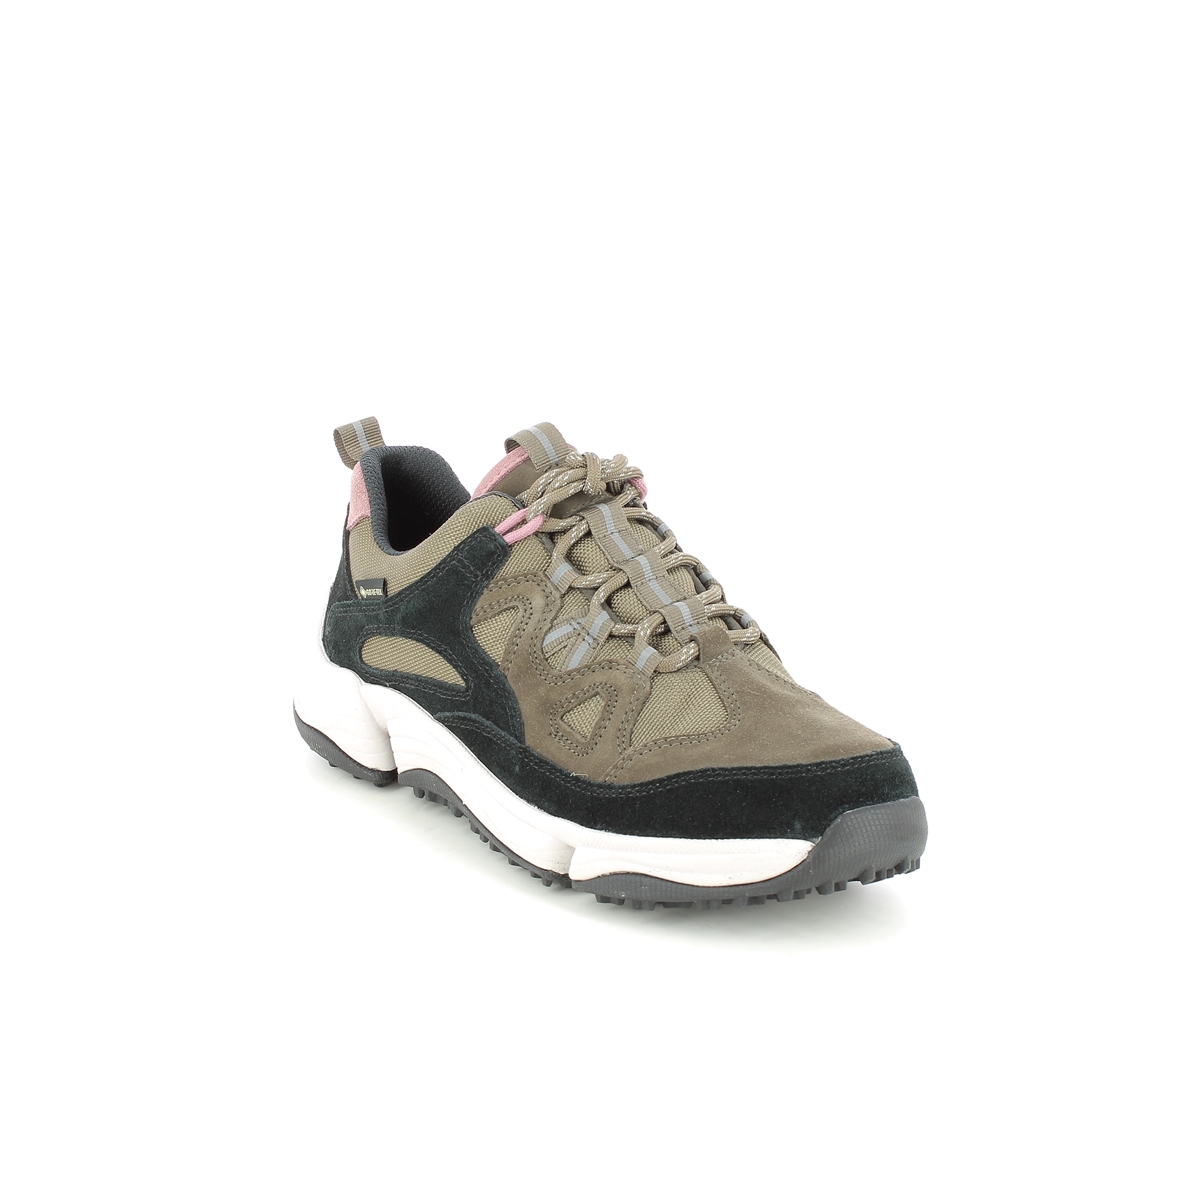 Clarks Tri Path Gtx Olive suede Womens Walking Shoes 6102-84D in a Plain Leather in Size 5